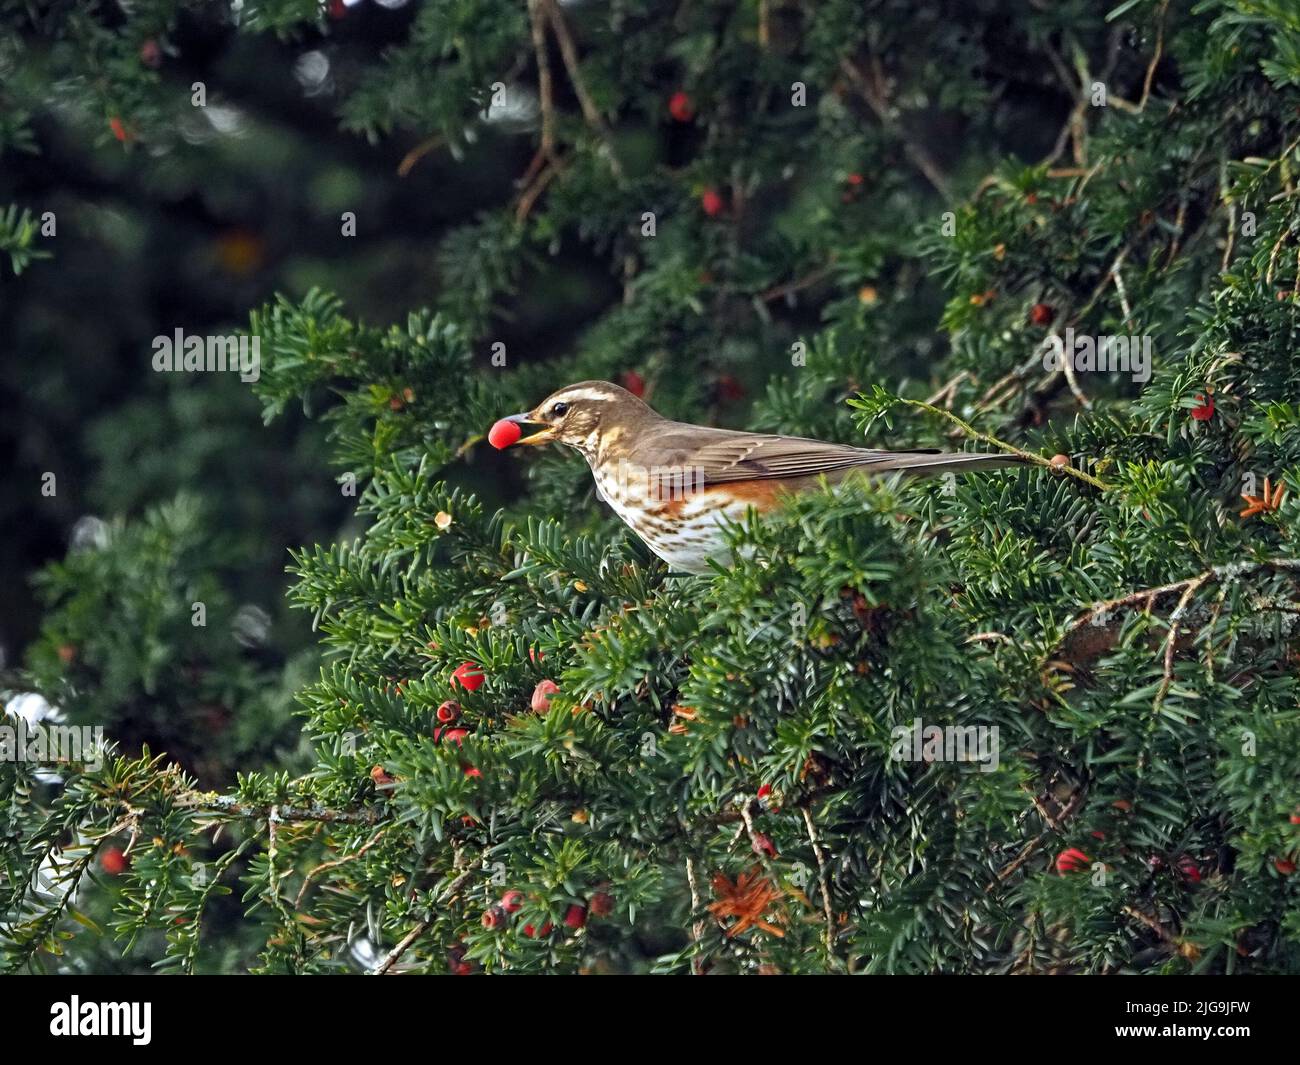 Redwing (Turdus iliacus) a migrant Winter thrush in UK feeding on berries of churchyard Yew tree (Taxus baccata) Cumbria, England Stock Photo